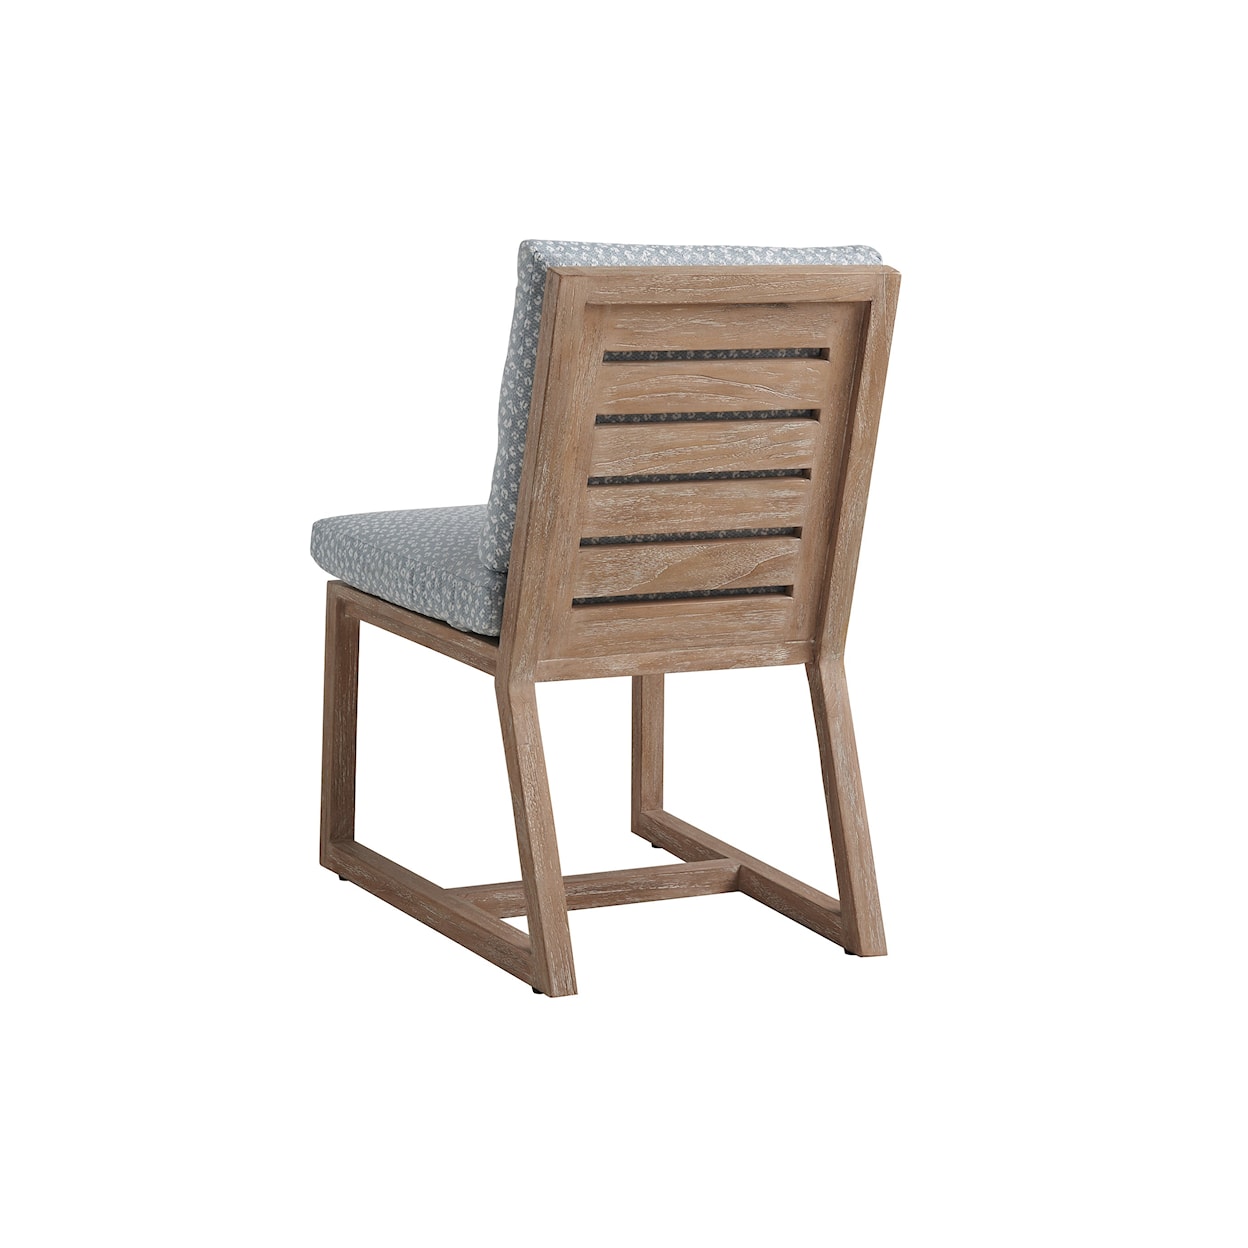 Tommy Bahama Outdoor Living Stillwater Cove Outdoor Dining Side Chair